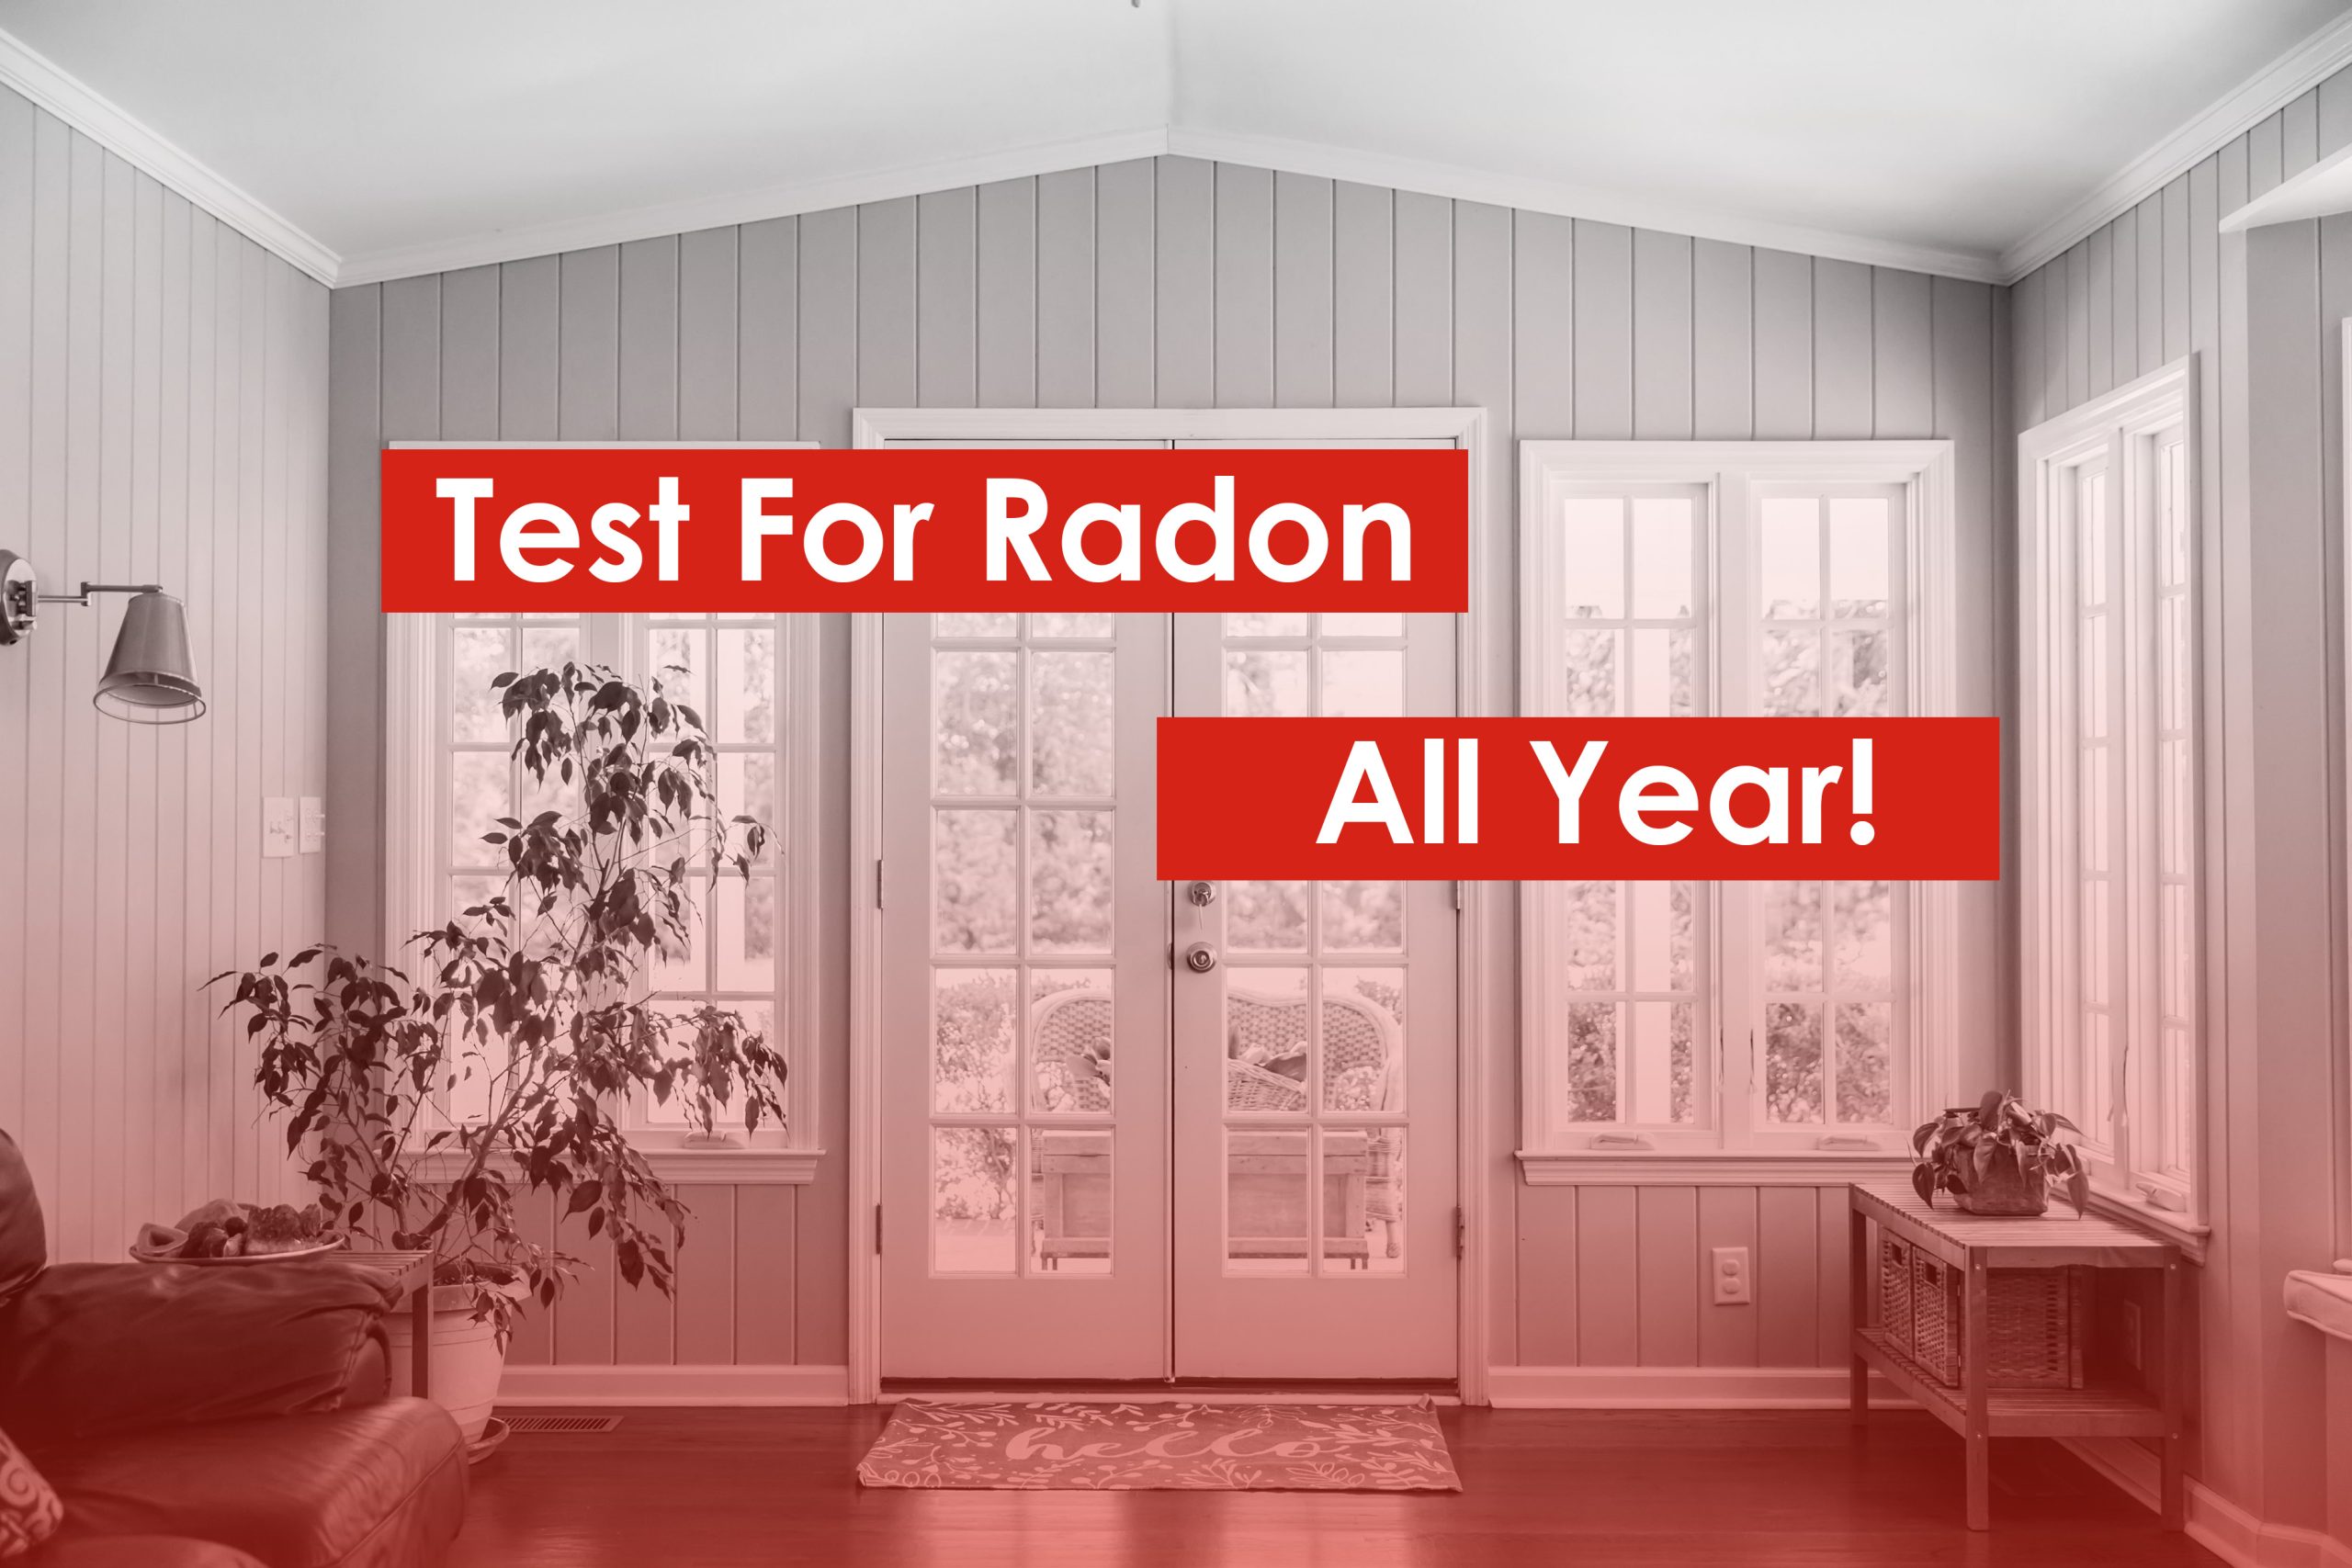 It is important that you test for radon year-round